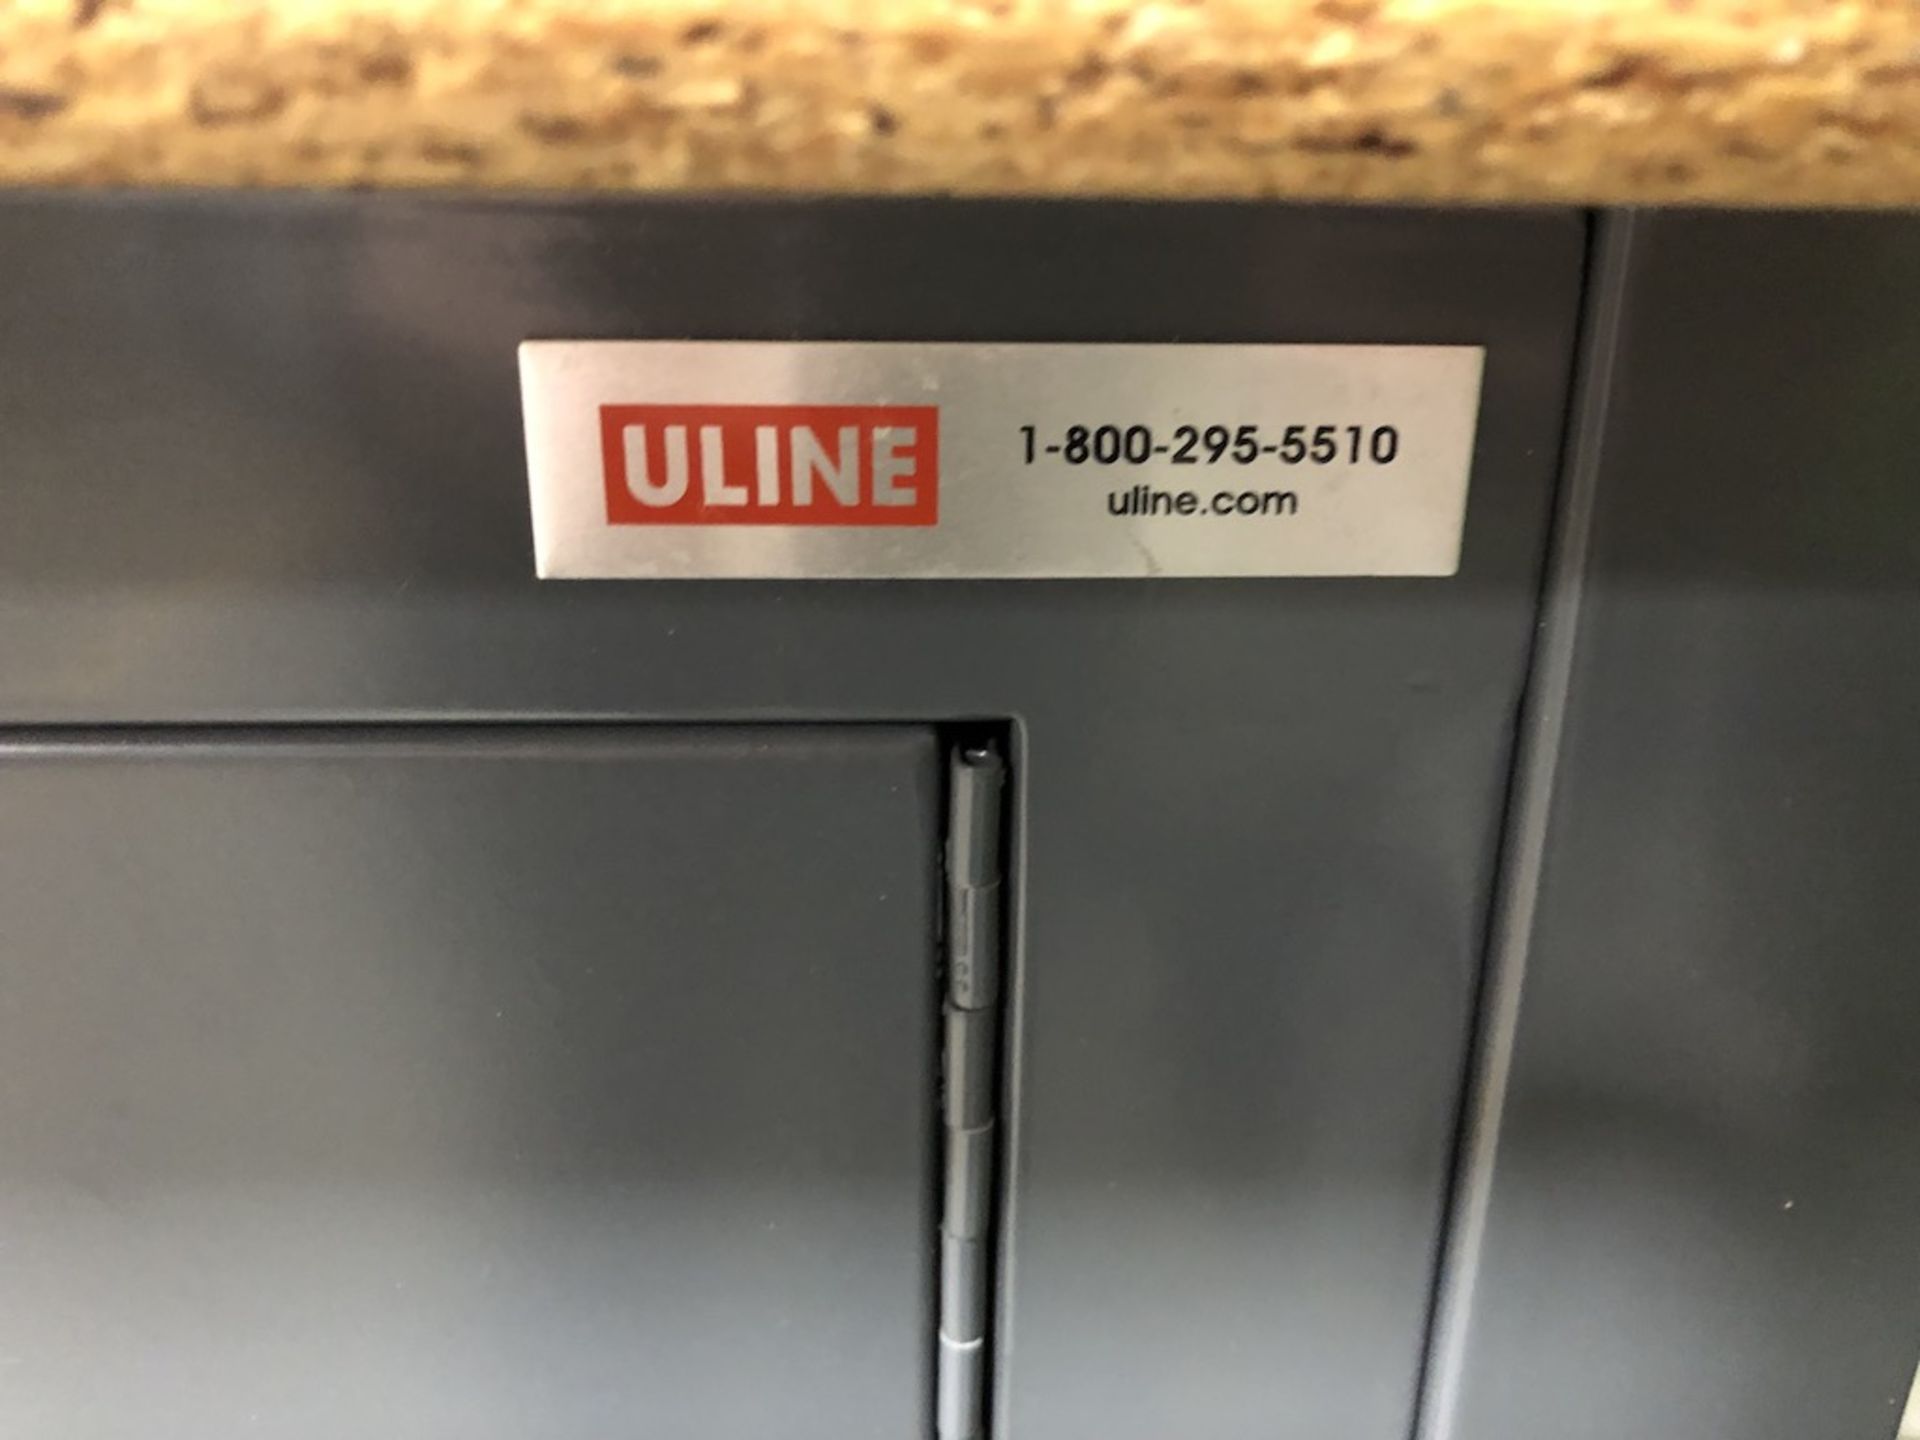 ULINE STORAGE CABINET W/ TABLE TOP( NO HAND TOOLS )( CONTENTS NOT INCLUDED ) 5FT L X 30IN W X 40IN H - Image 3 of 5